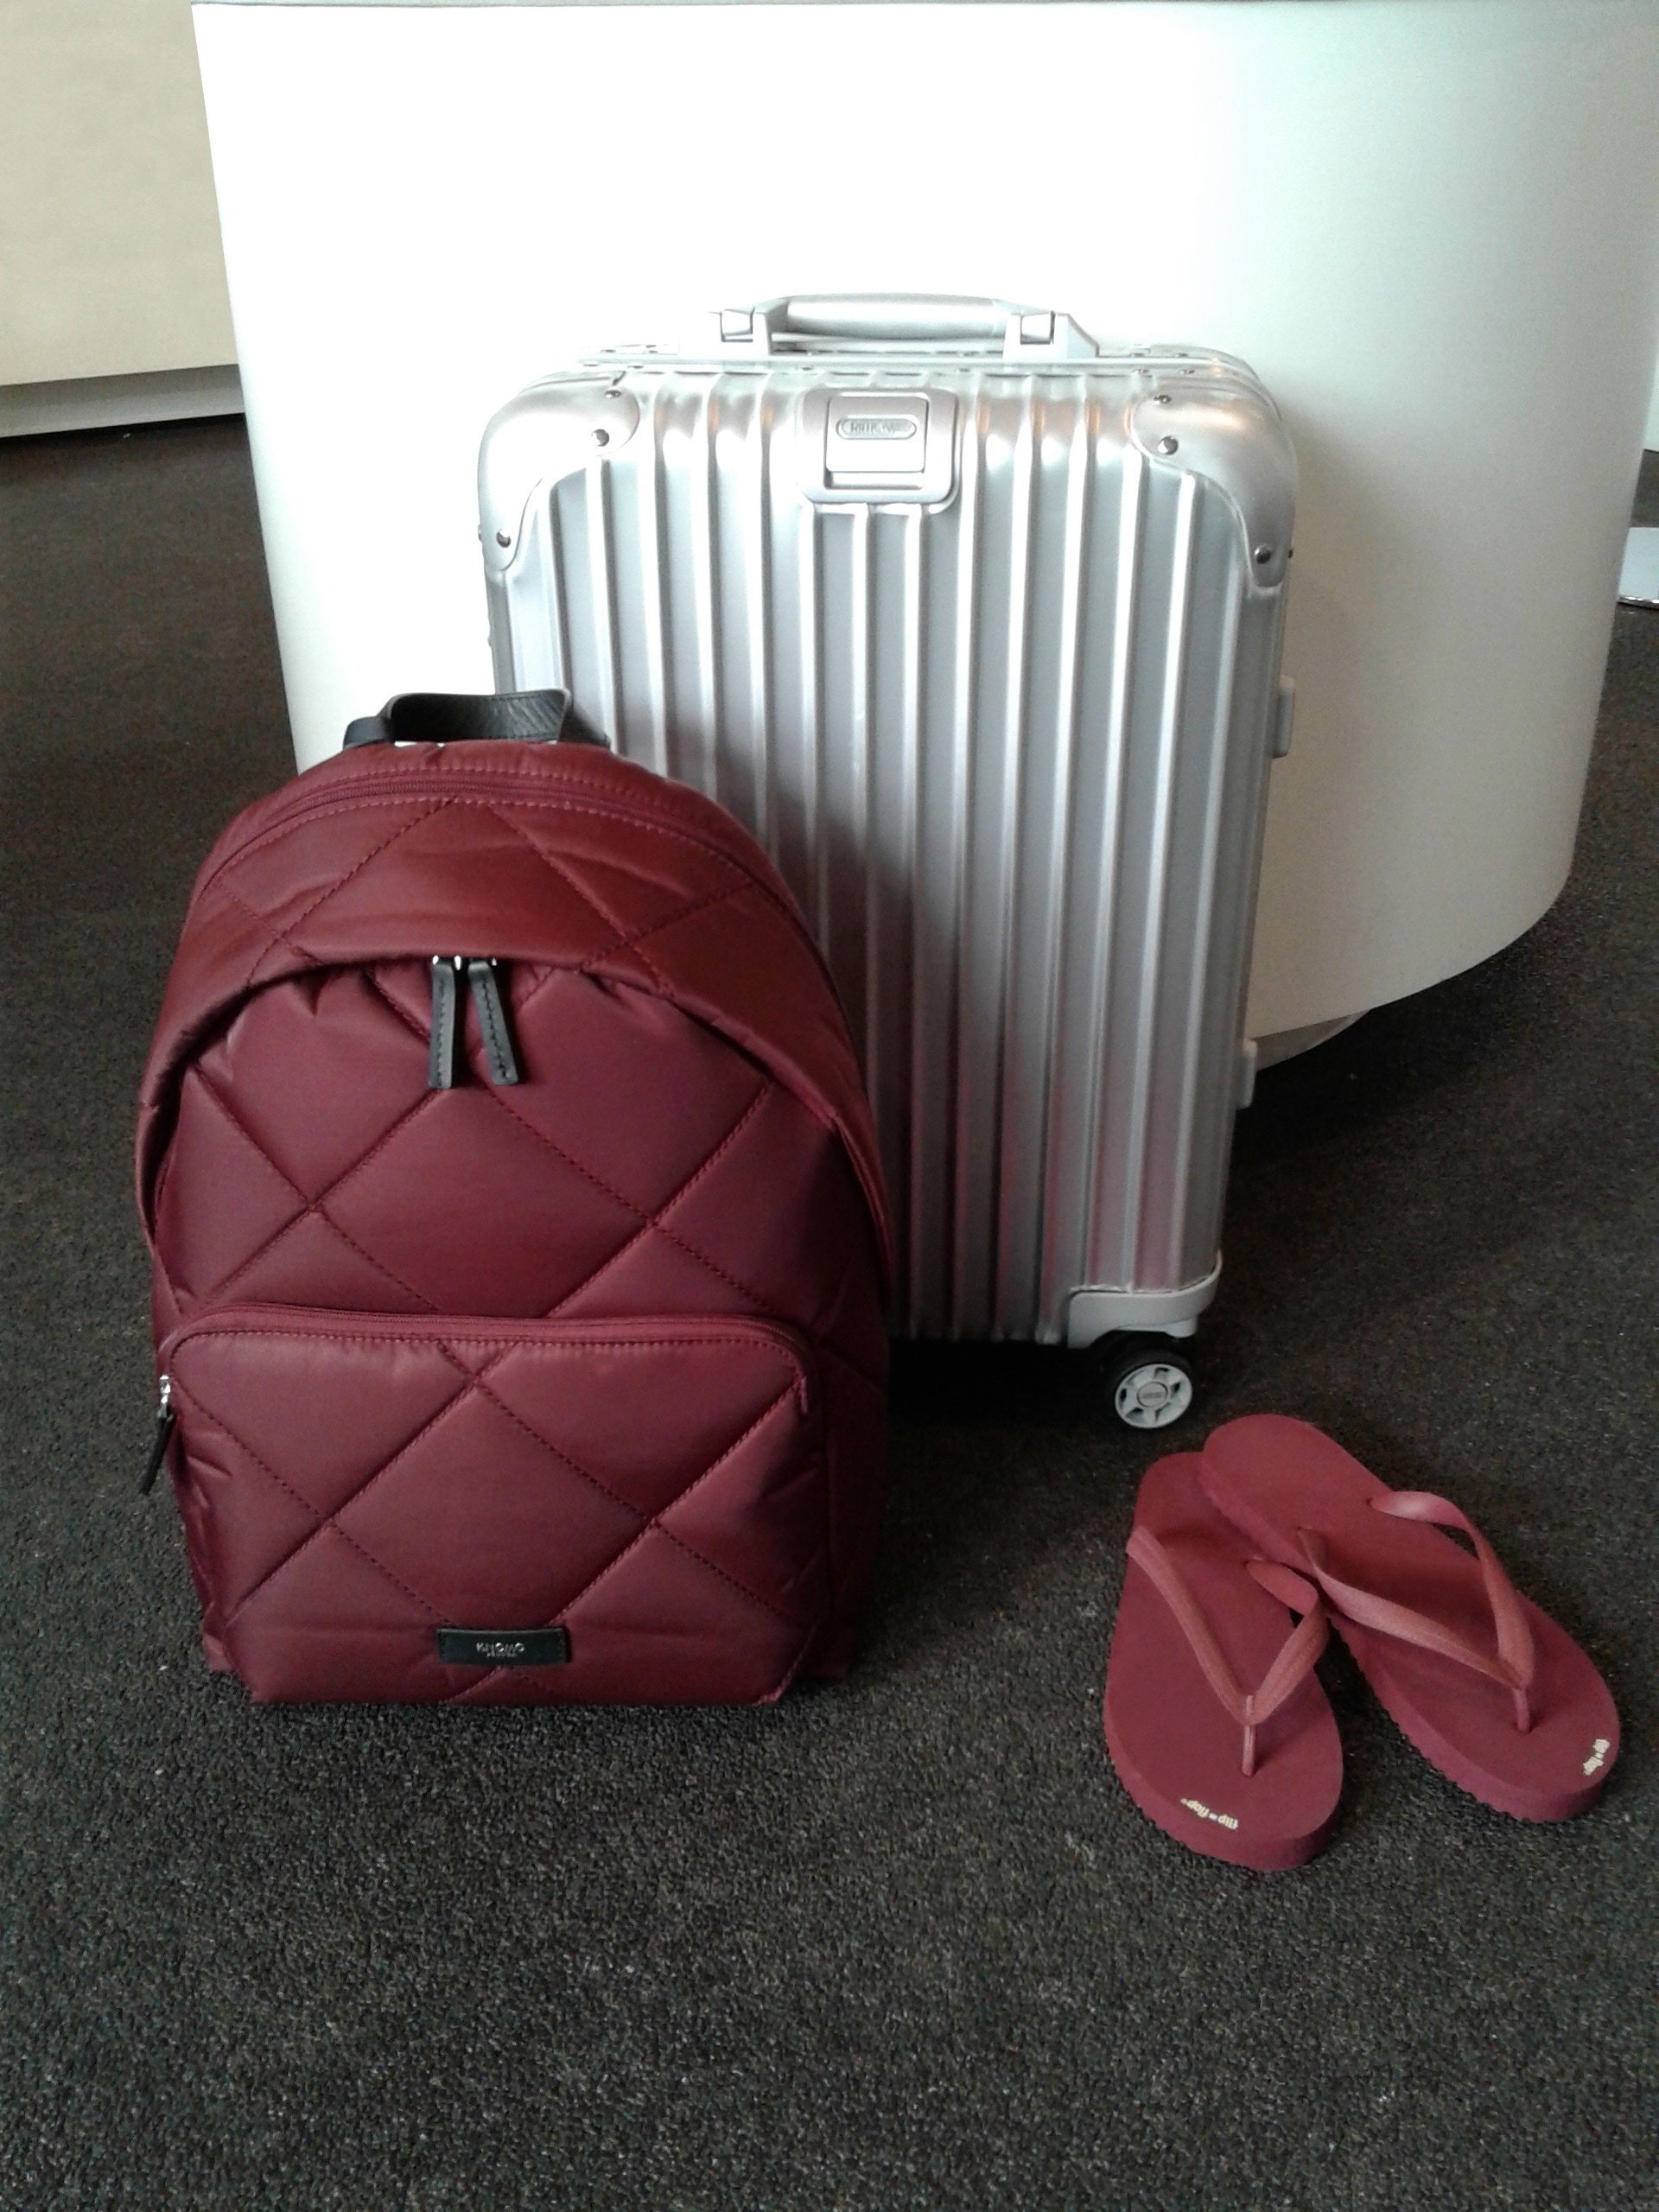 red backpack pair of red flip flops and silver luggage bag